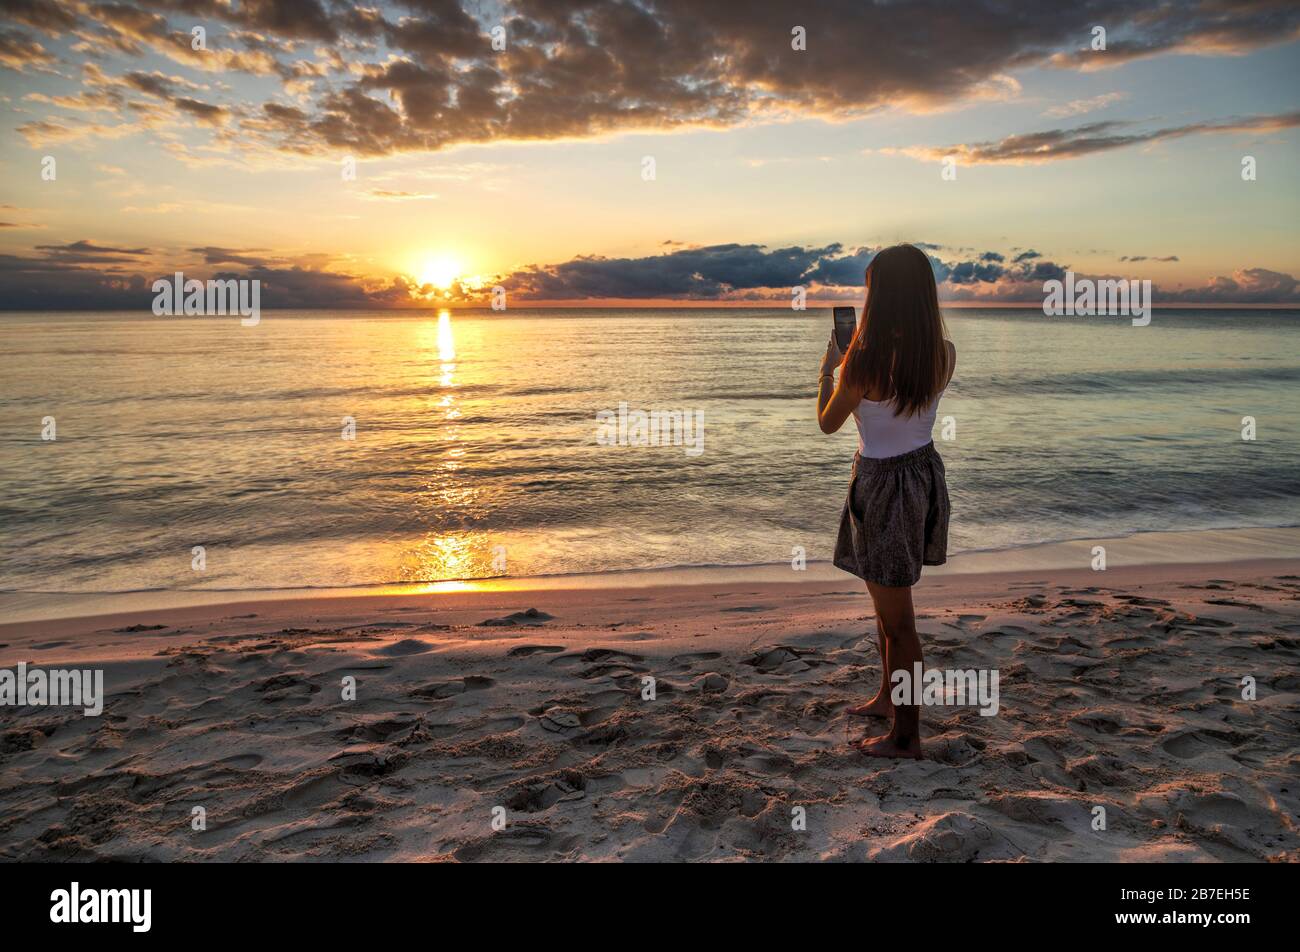 Young girl capturing vacation memories of a beautiful golden sunrise by the beach at Riviera Maya in Cancun, Mexico, with her smartphone. Stock Photo